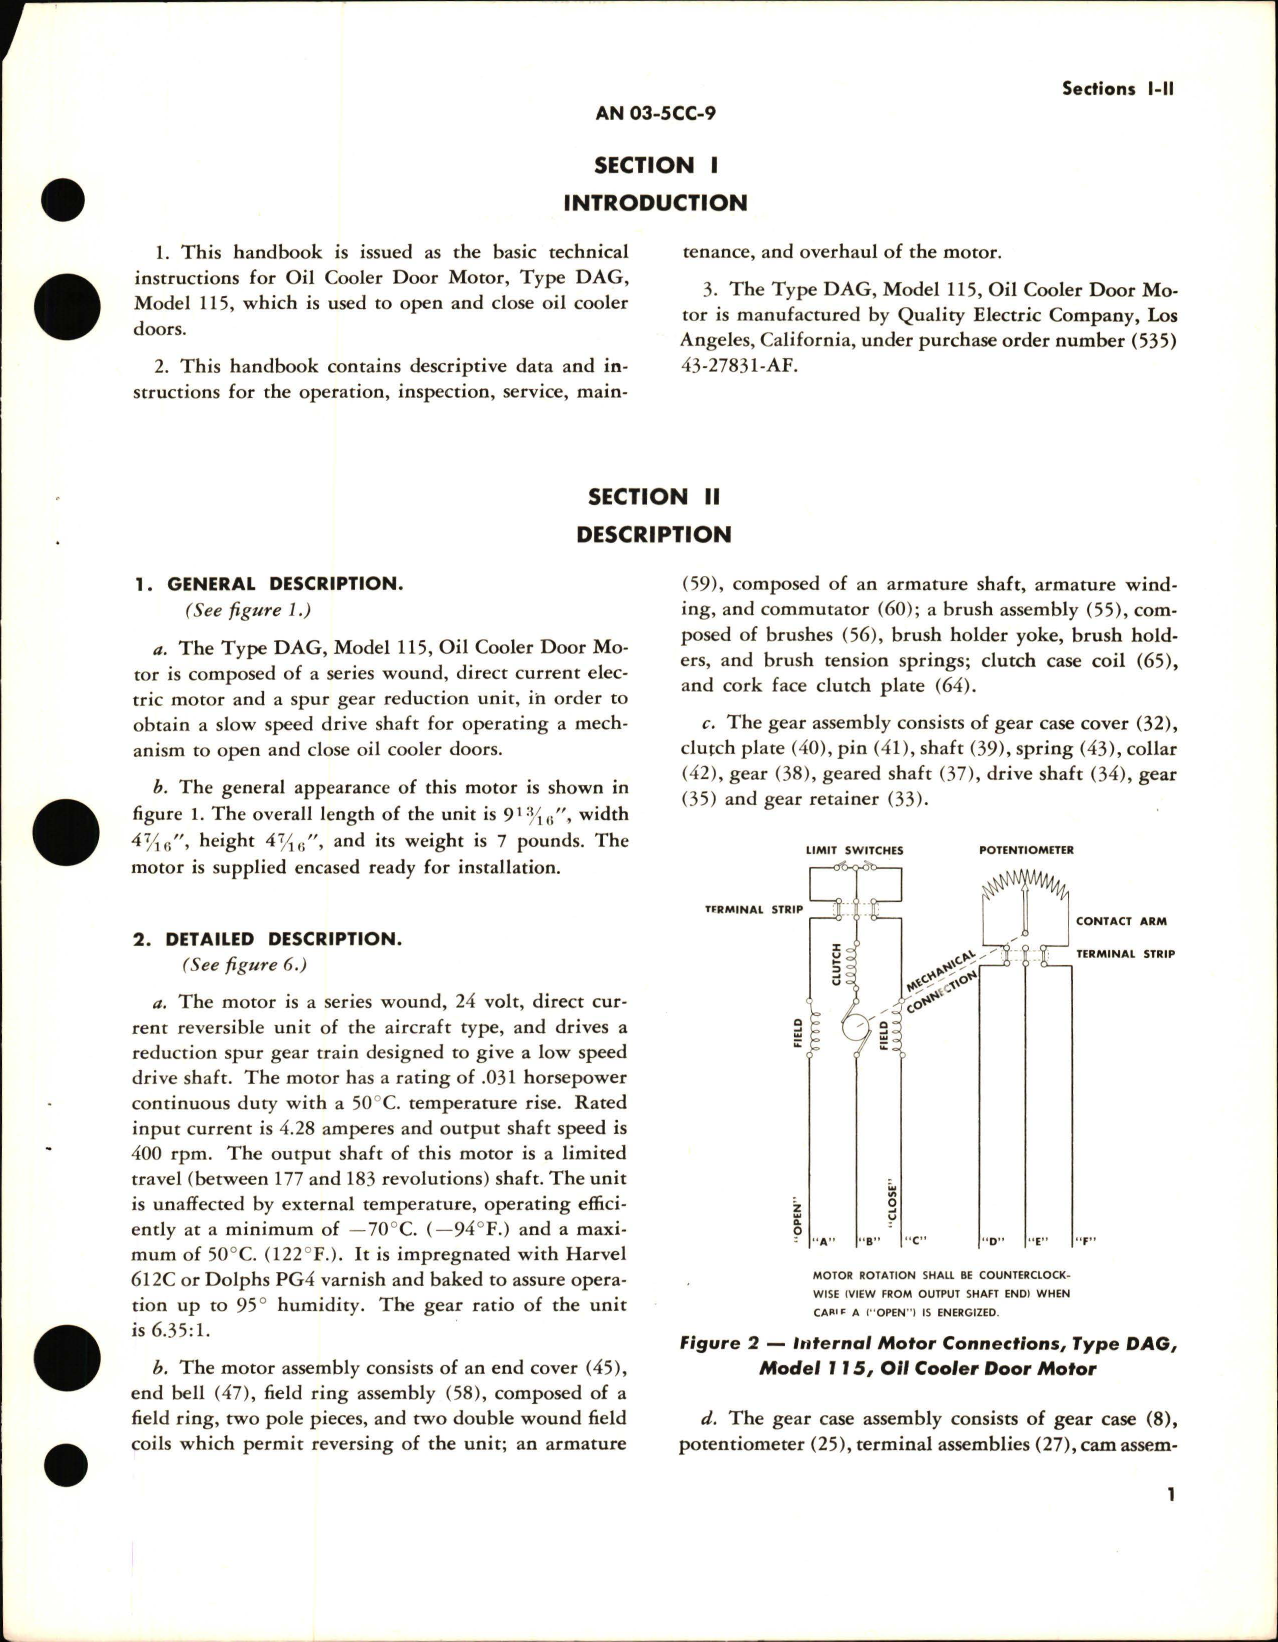 Sample page 5 from AirCorps Library document: Instructions with Parts for Oil Cooler Door Motor Type Dag Model 115